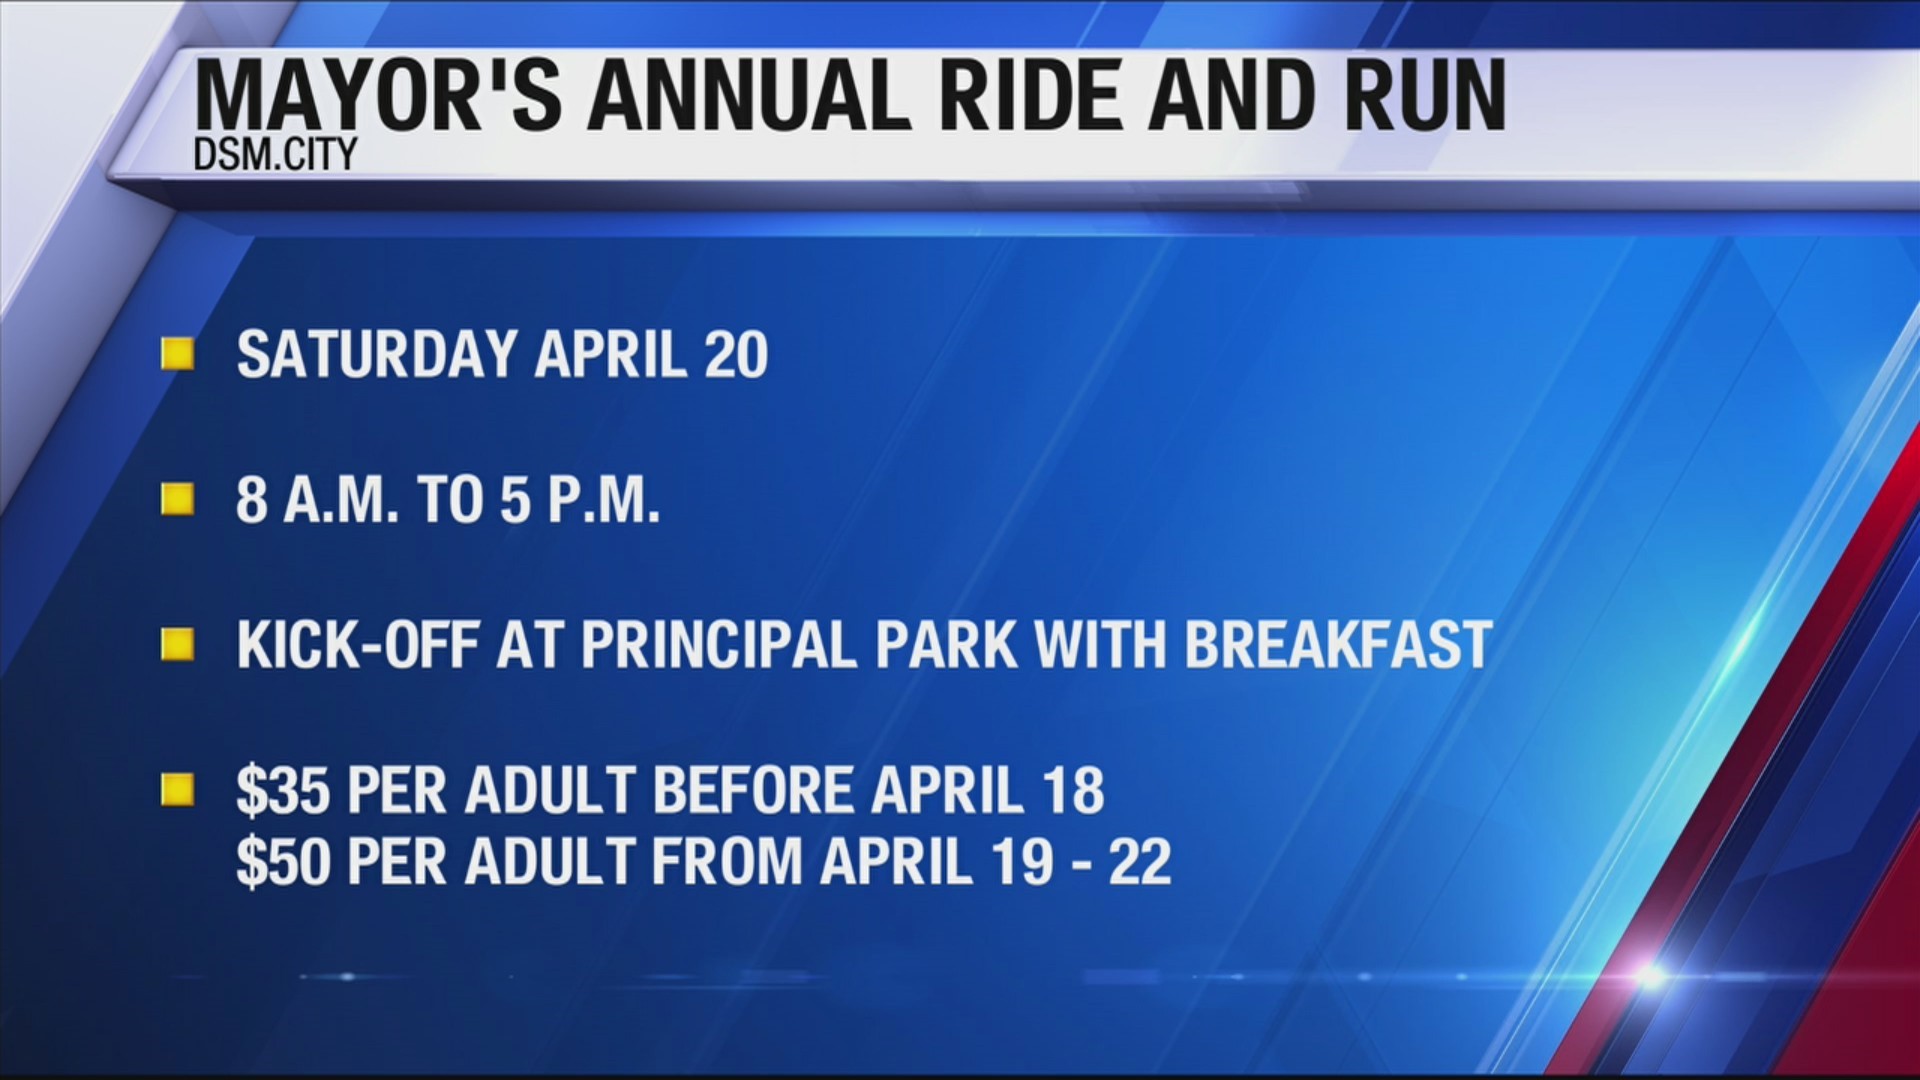 Do you want to help sustain Des Moines' trails? If so, Jen Fletcher with Des Moines Parks and Recreation stopped by Good Morning Iowa to tell us how you do just that by participating in the Mayor's Annual Ride and Run this weekend.